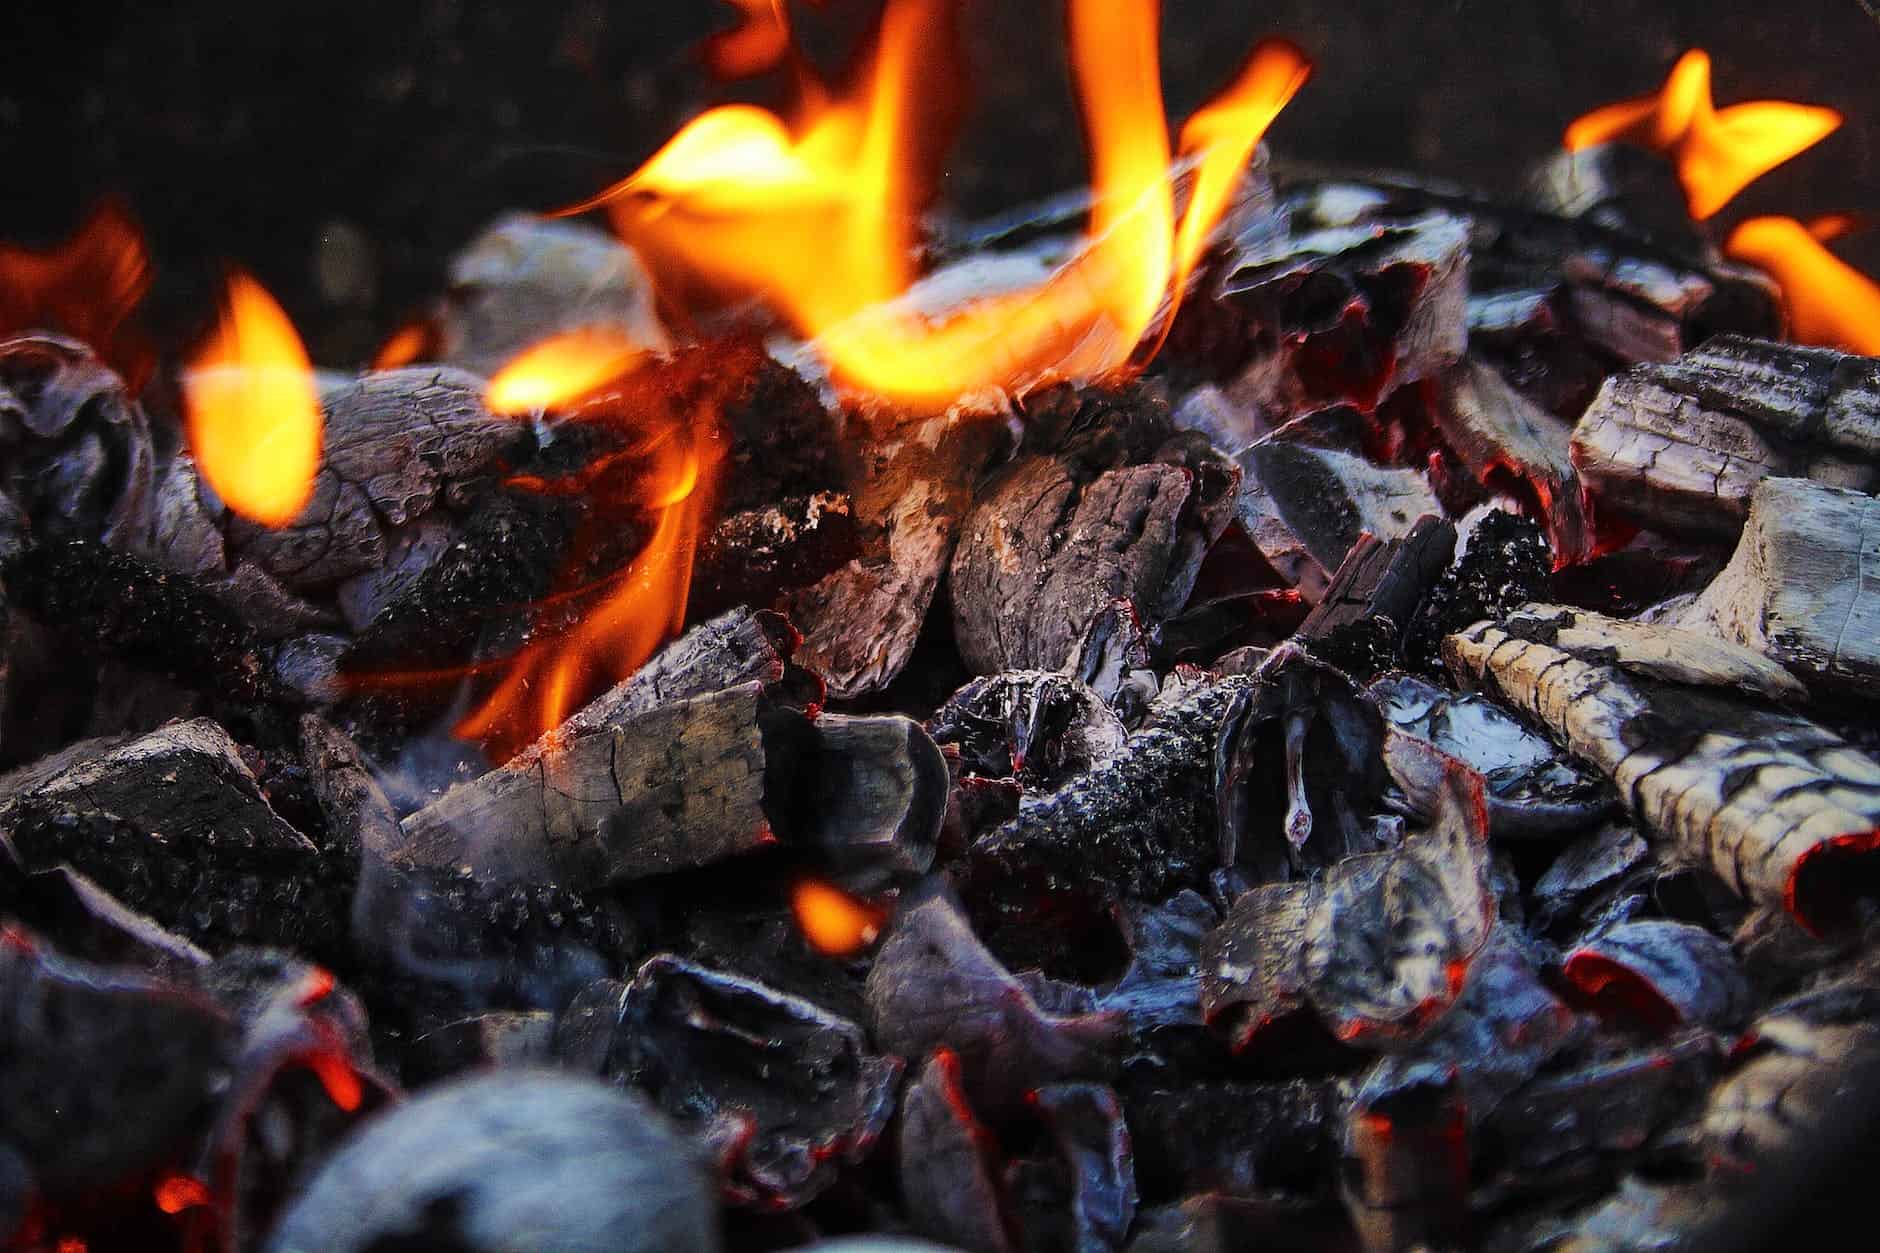 burning woods and charcoal in close up photography